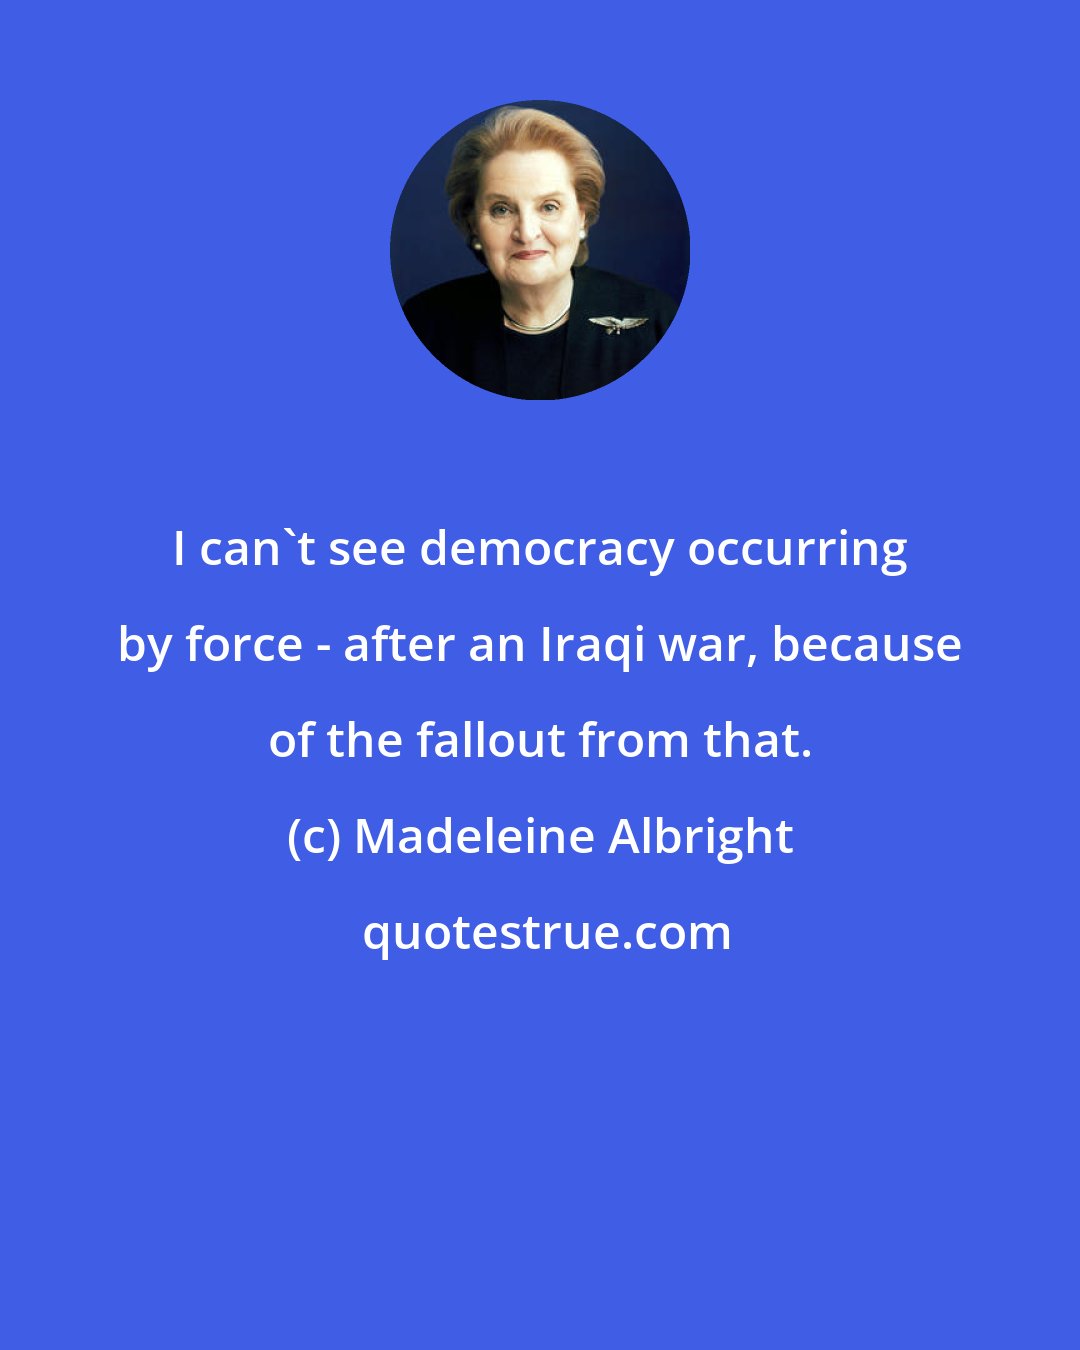 Madeleine Albright: I can't see democracy occurring by force - after an Iraqi war, because of the fallout from that.